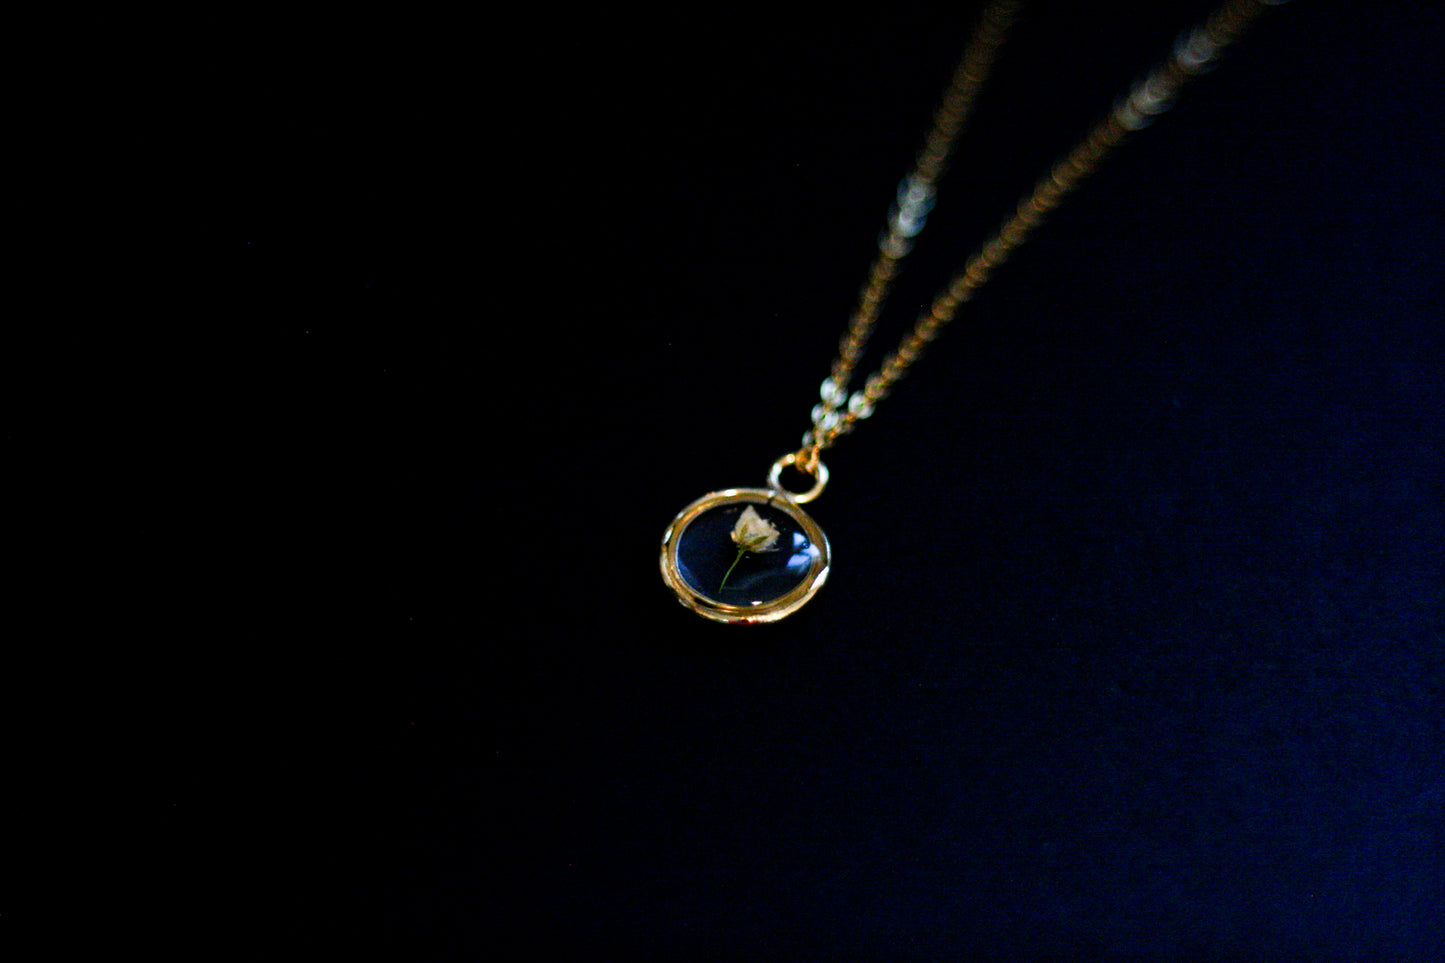 Yellow gold baby's breath necklace